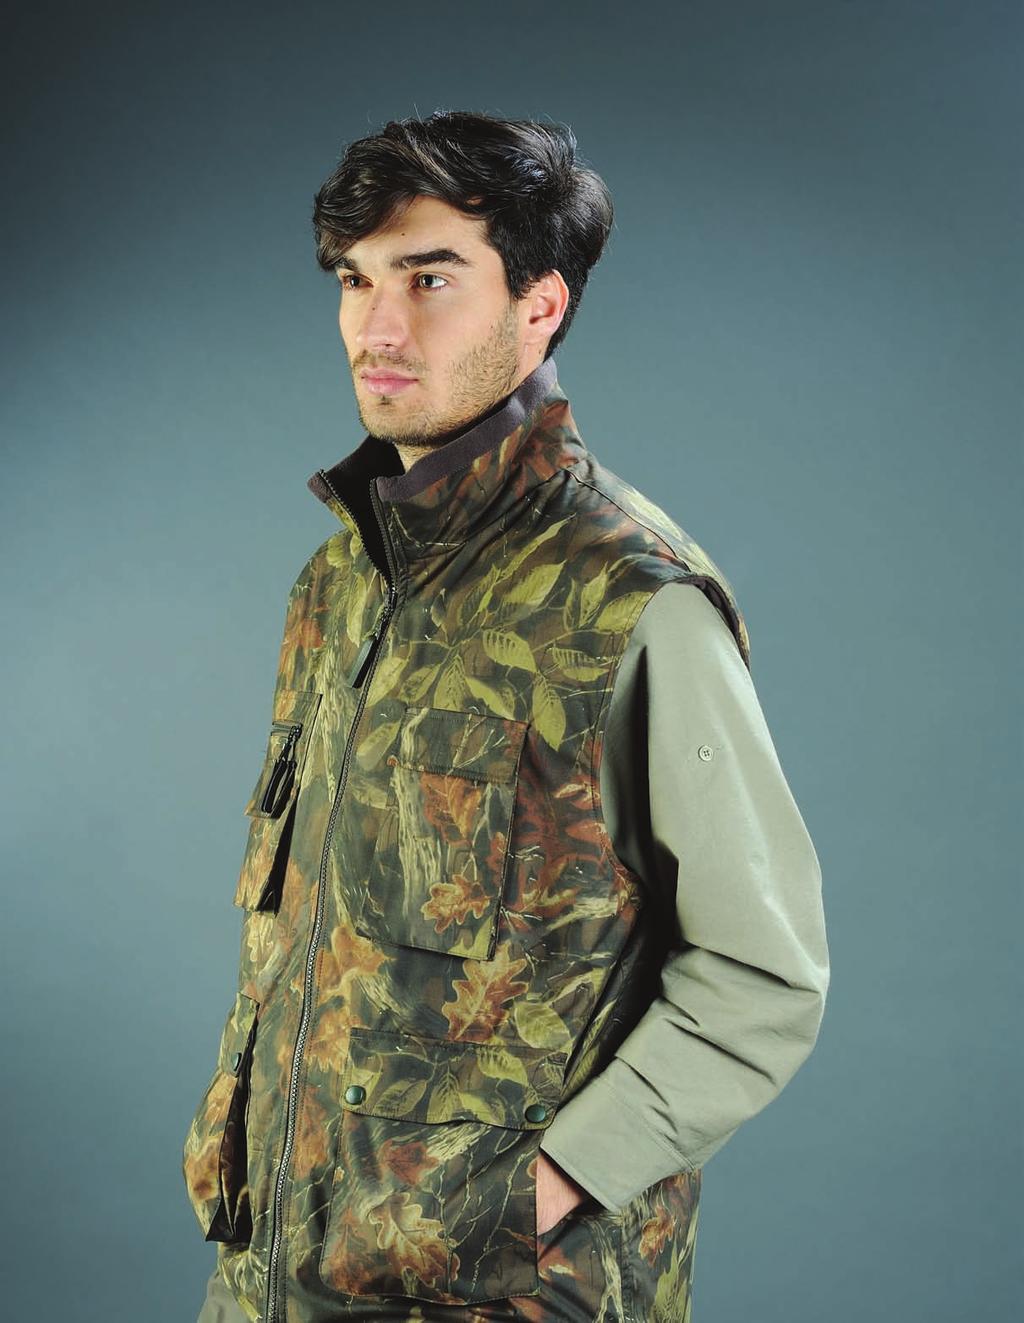 CAMOUFLAGE WINTER VEST CODE 30-1442 High volume functional pockets with flaps.